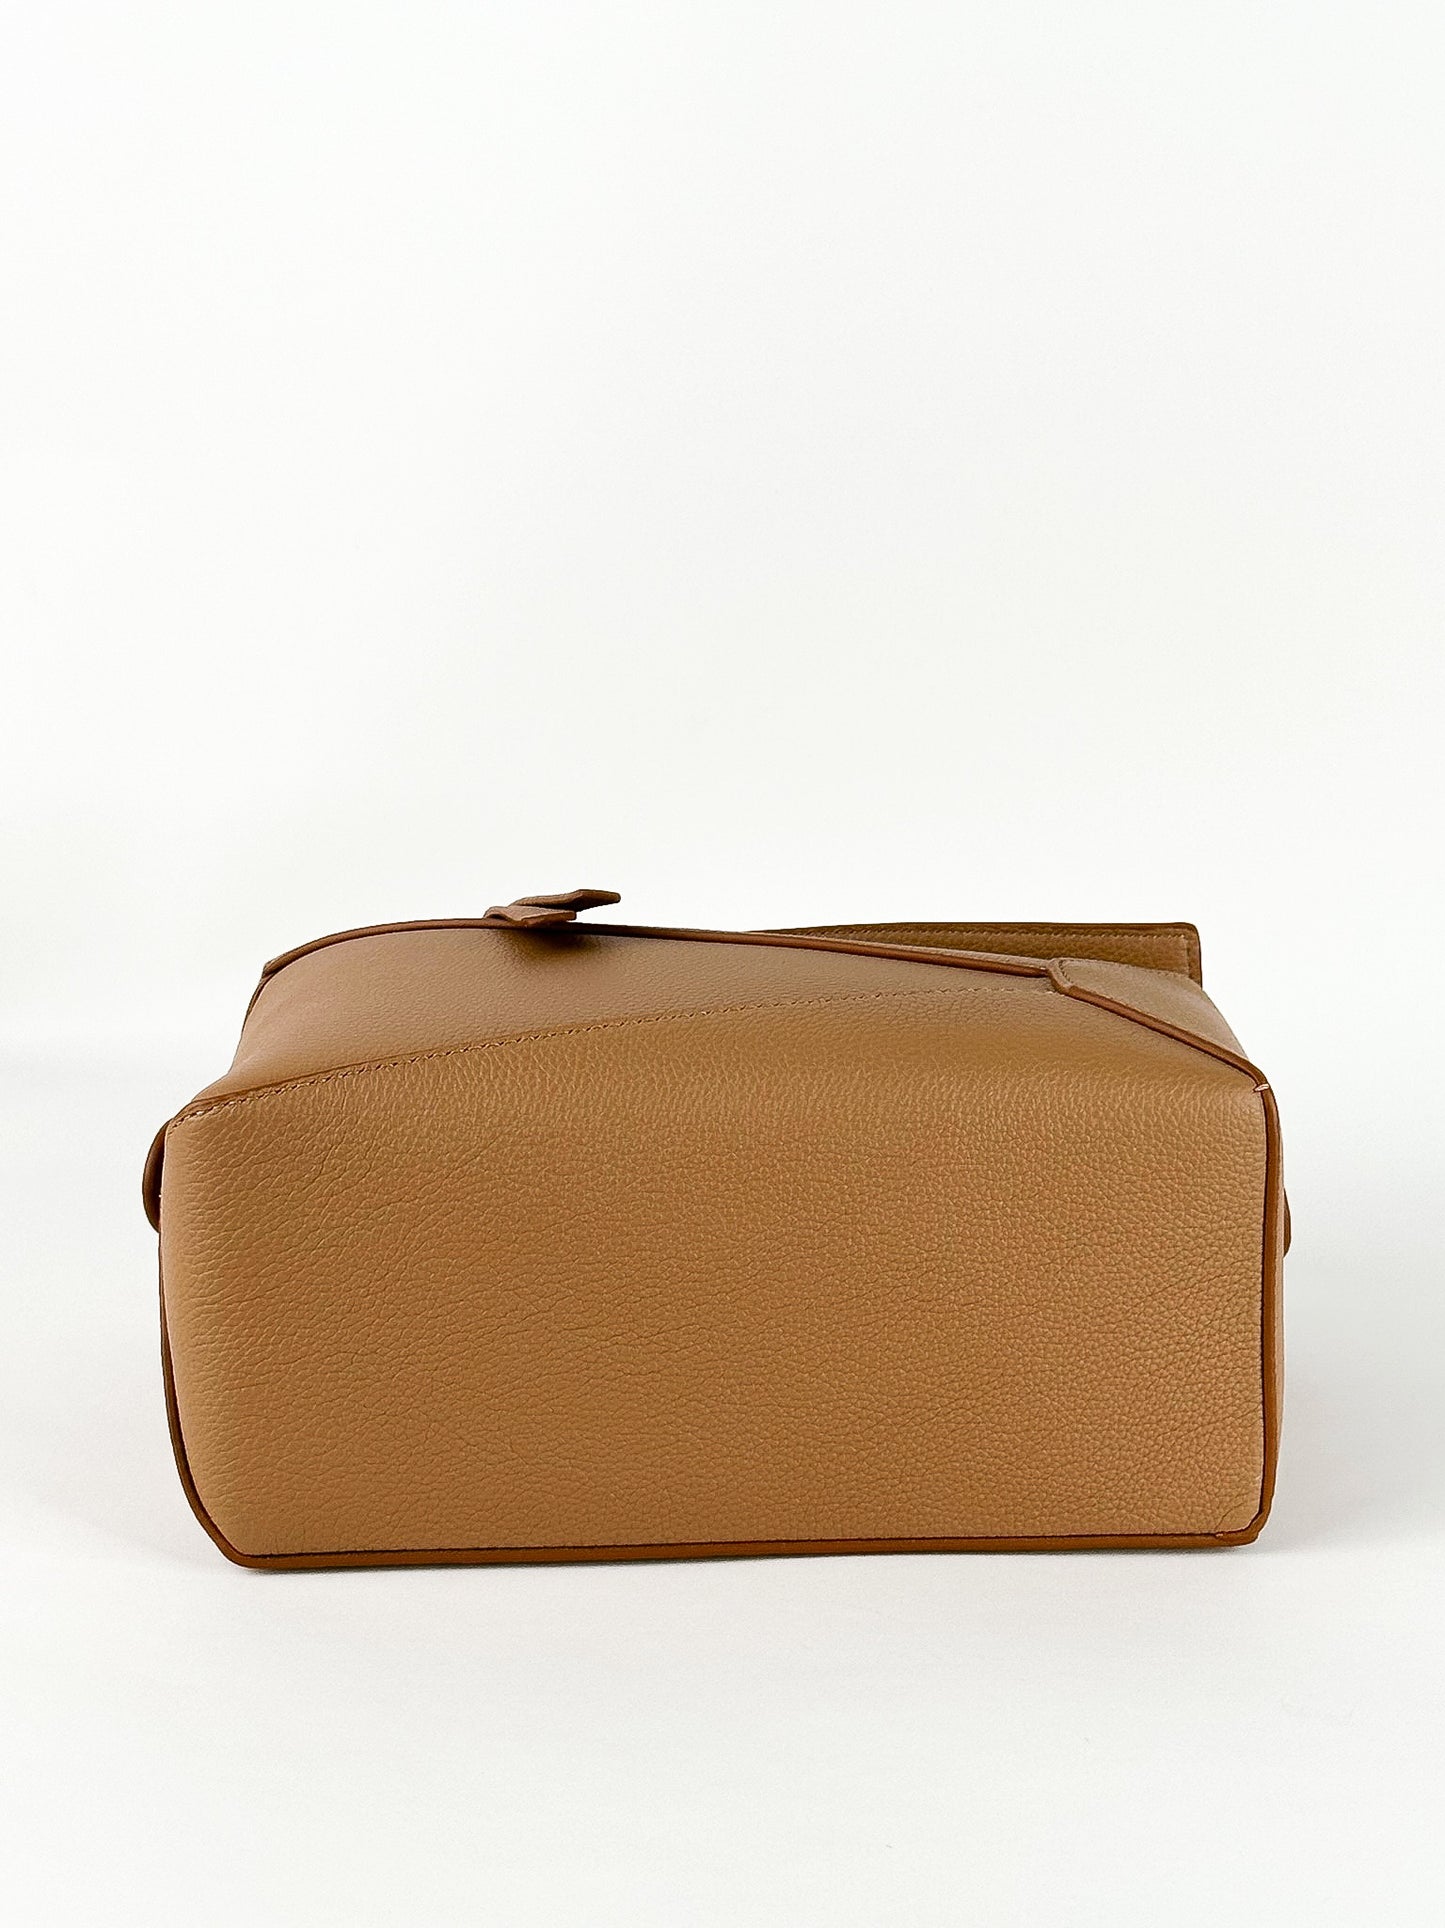 Loewe Puzzle Edge Small Leather Handbag in Toffee